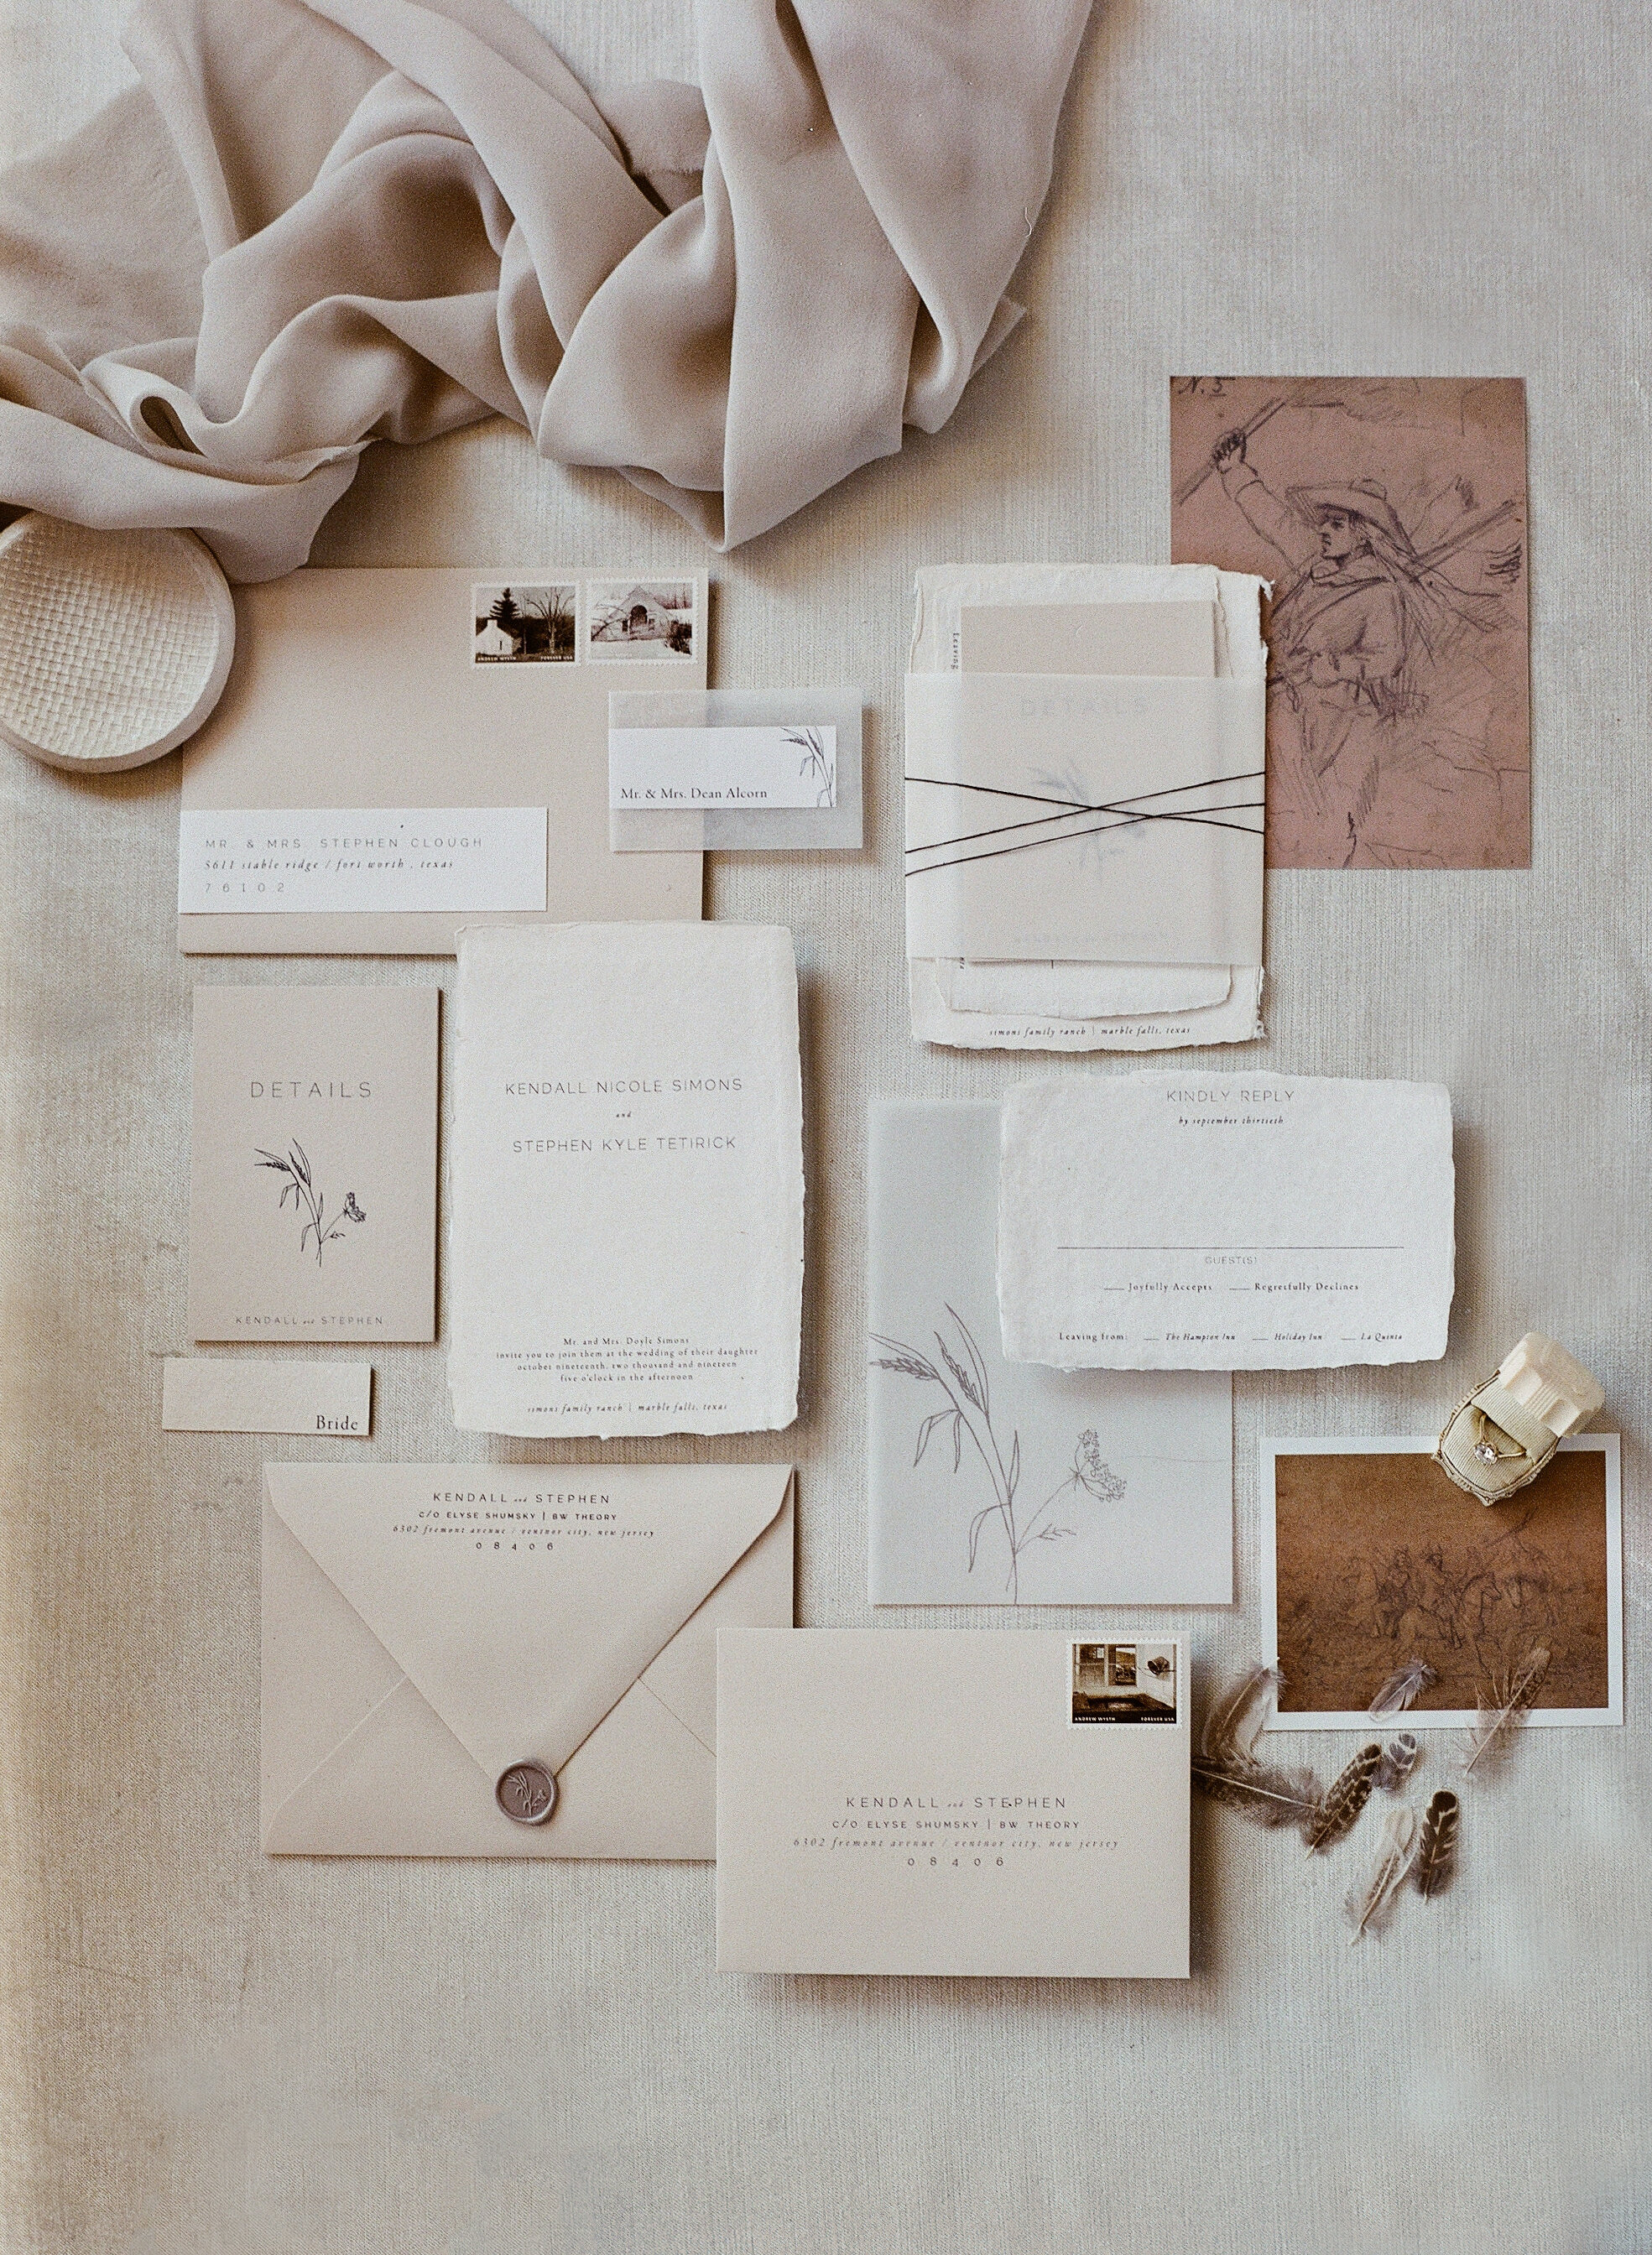 Austin wedding at Prospect House, invitations by Dear Darling Calligraphy